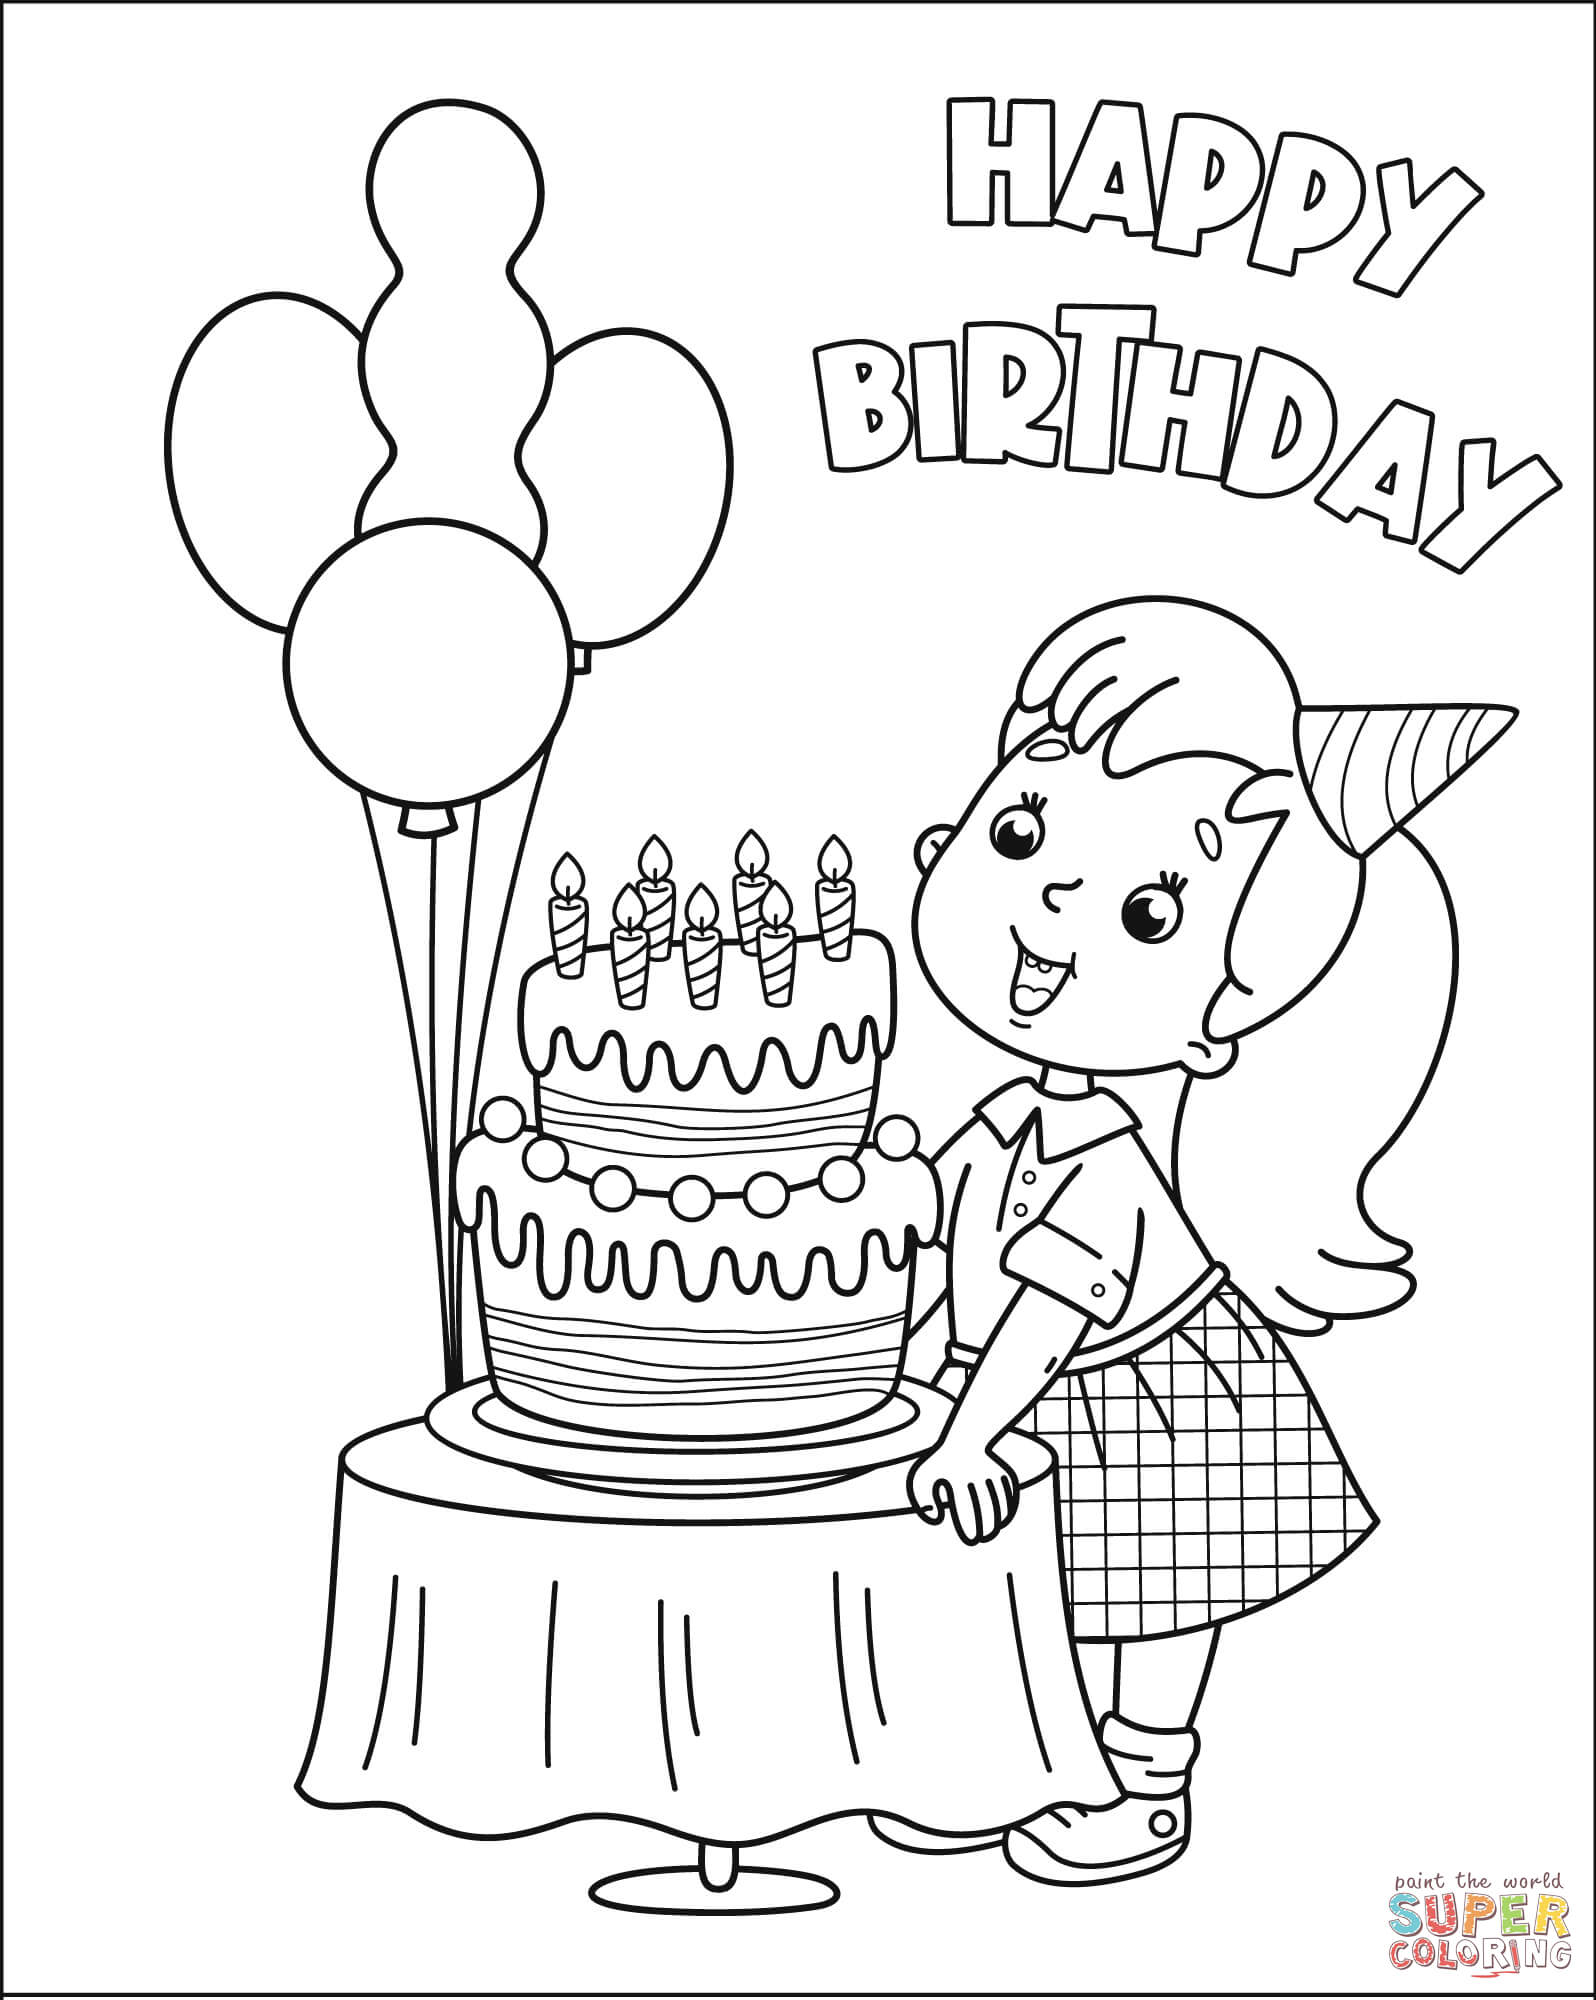 Happy Birthday with Girl 4 coloring page | Free Printable Coloring Pages